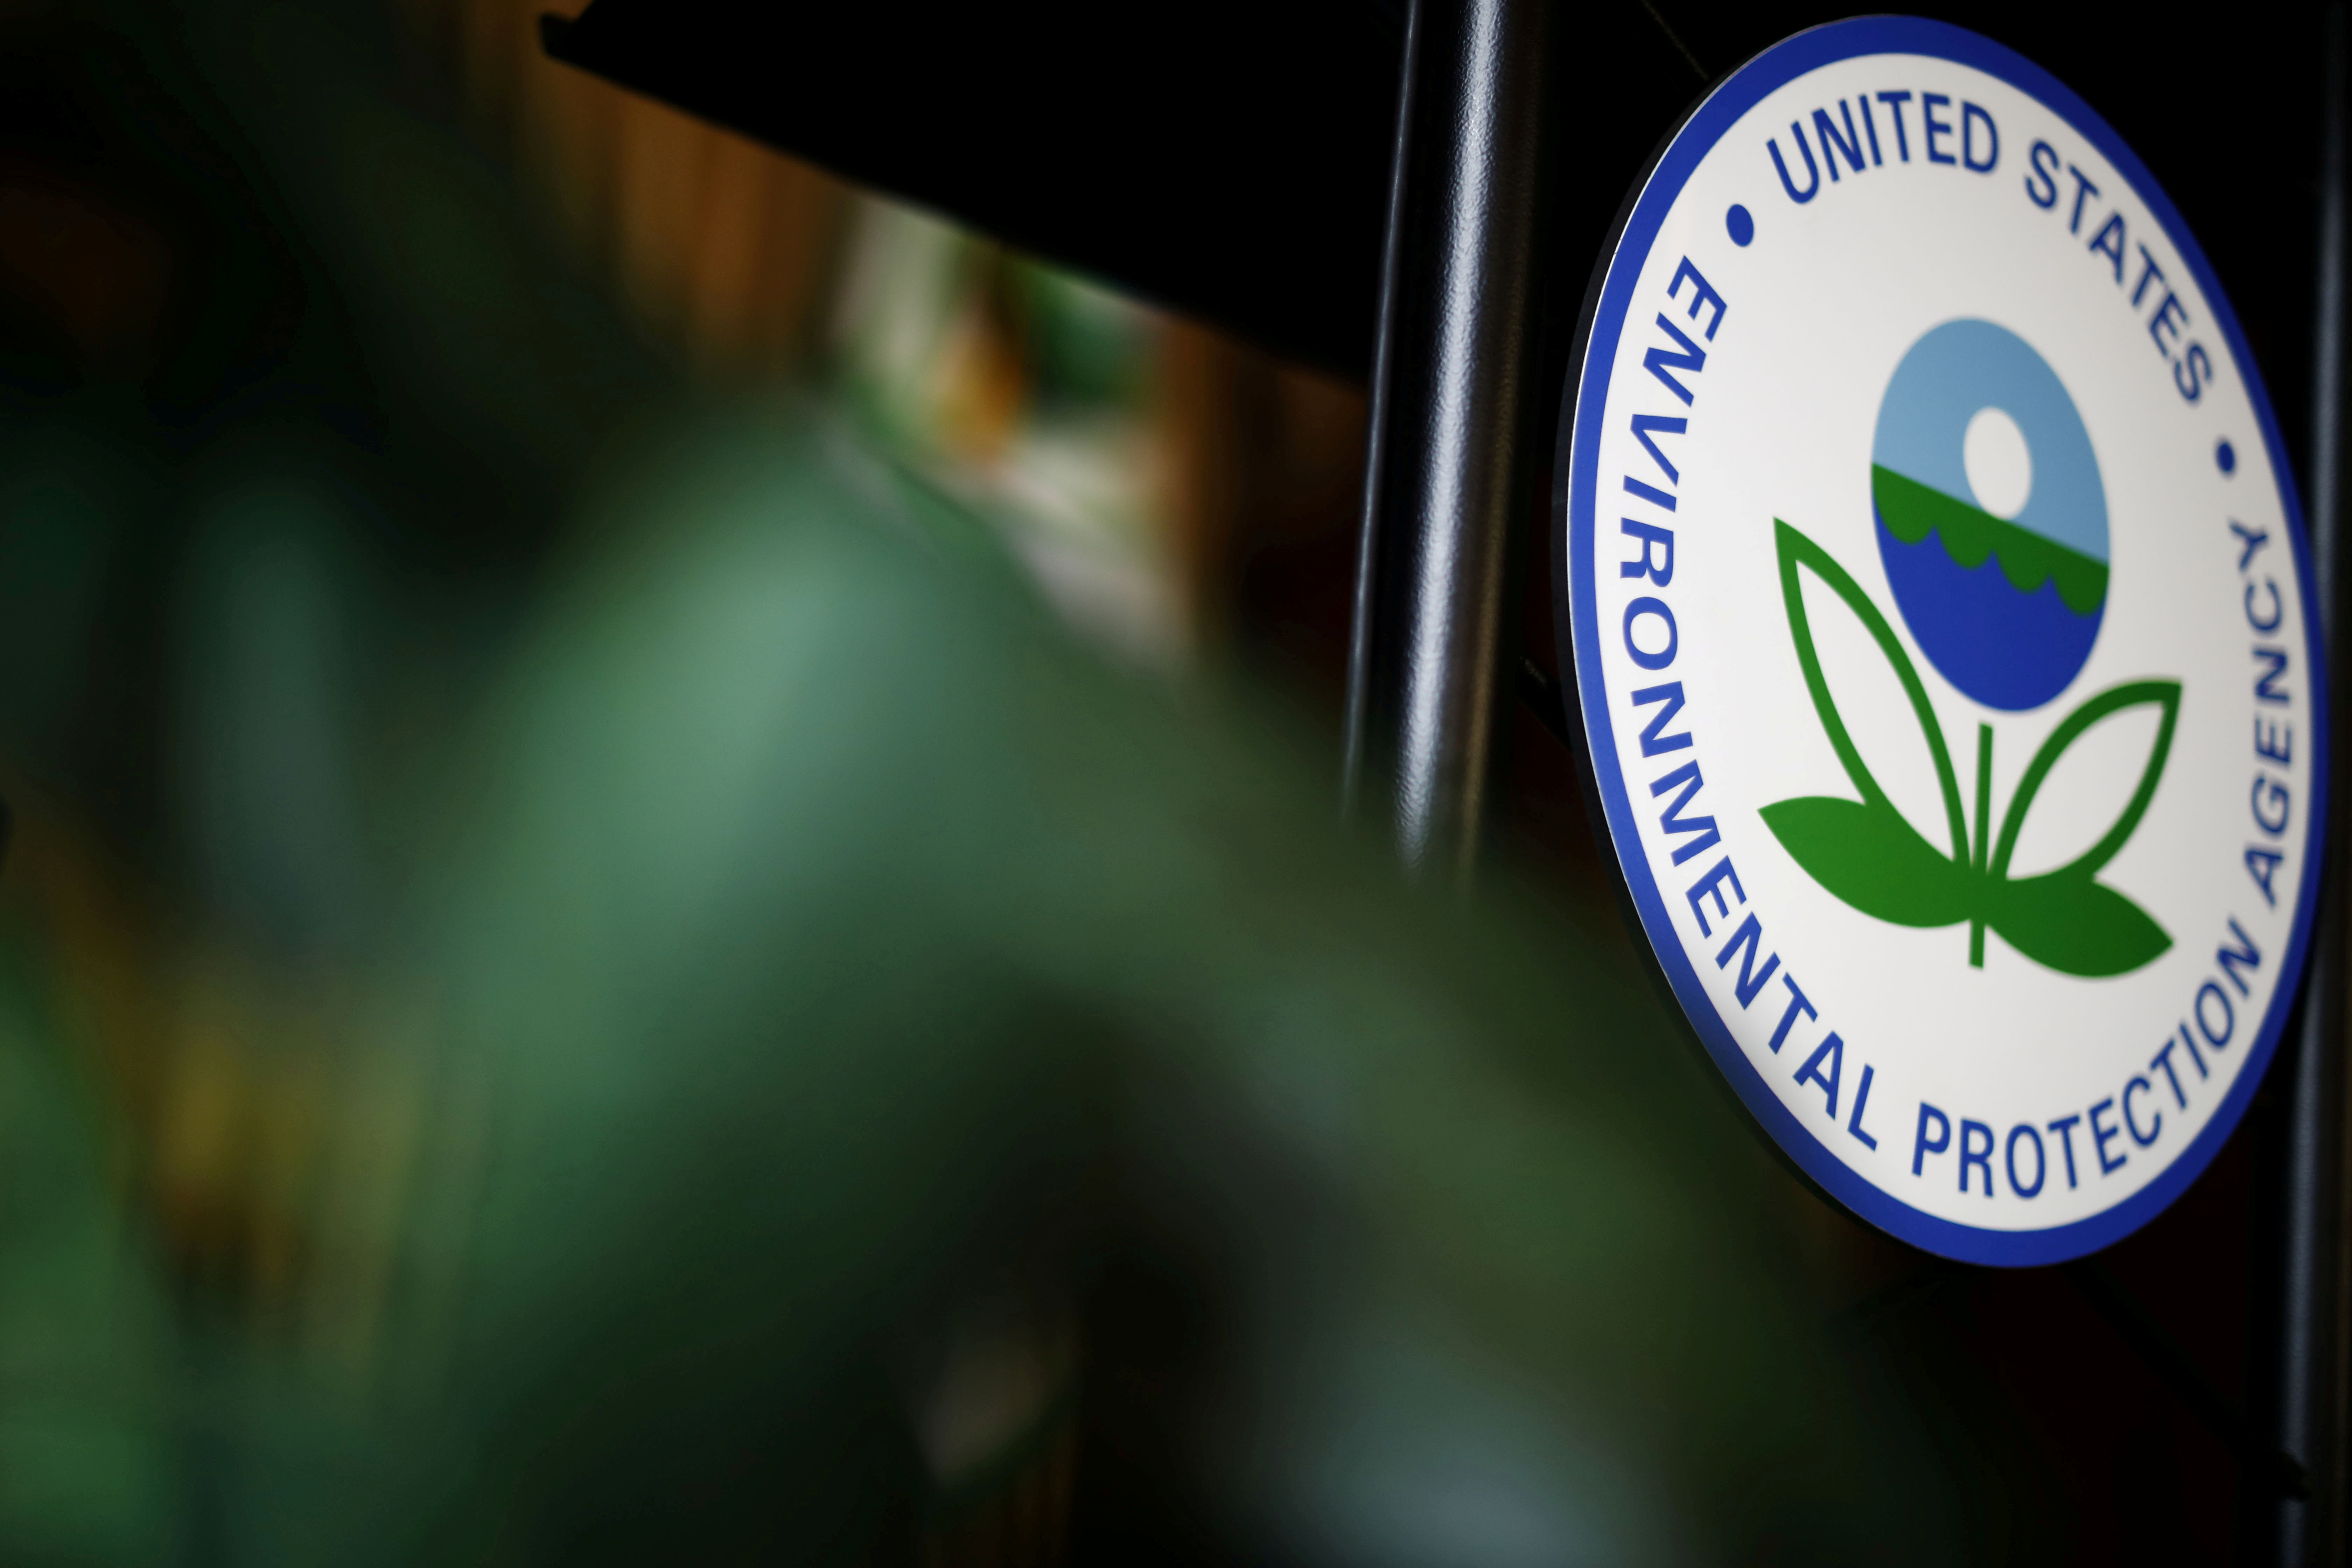 The U.S. Environmental Protection Agency (EPA) sign is seen on the podium at EPA headquarters in Washington